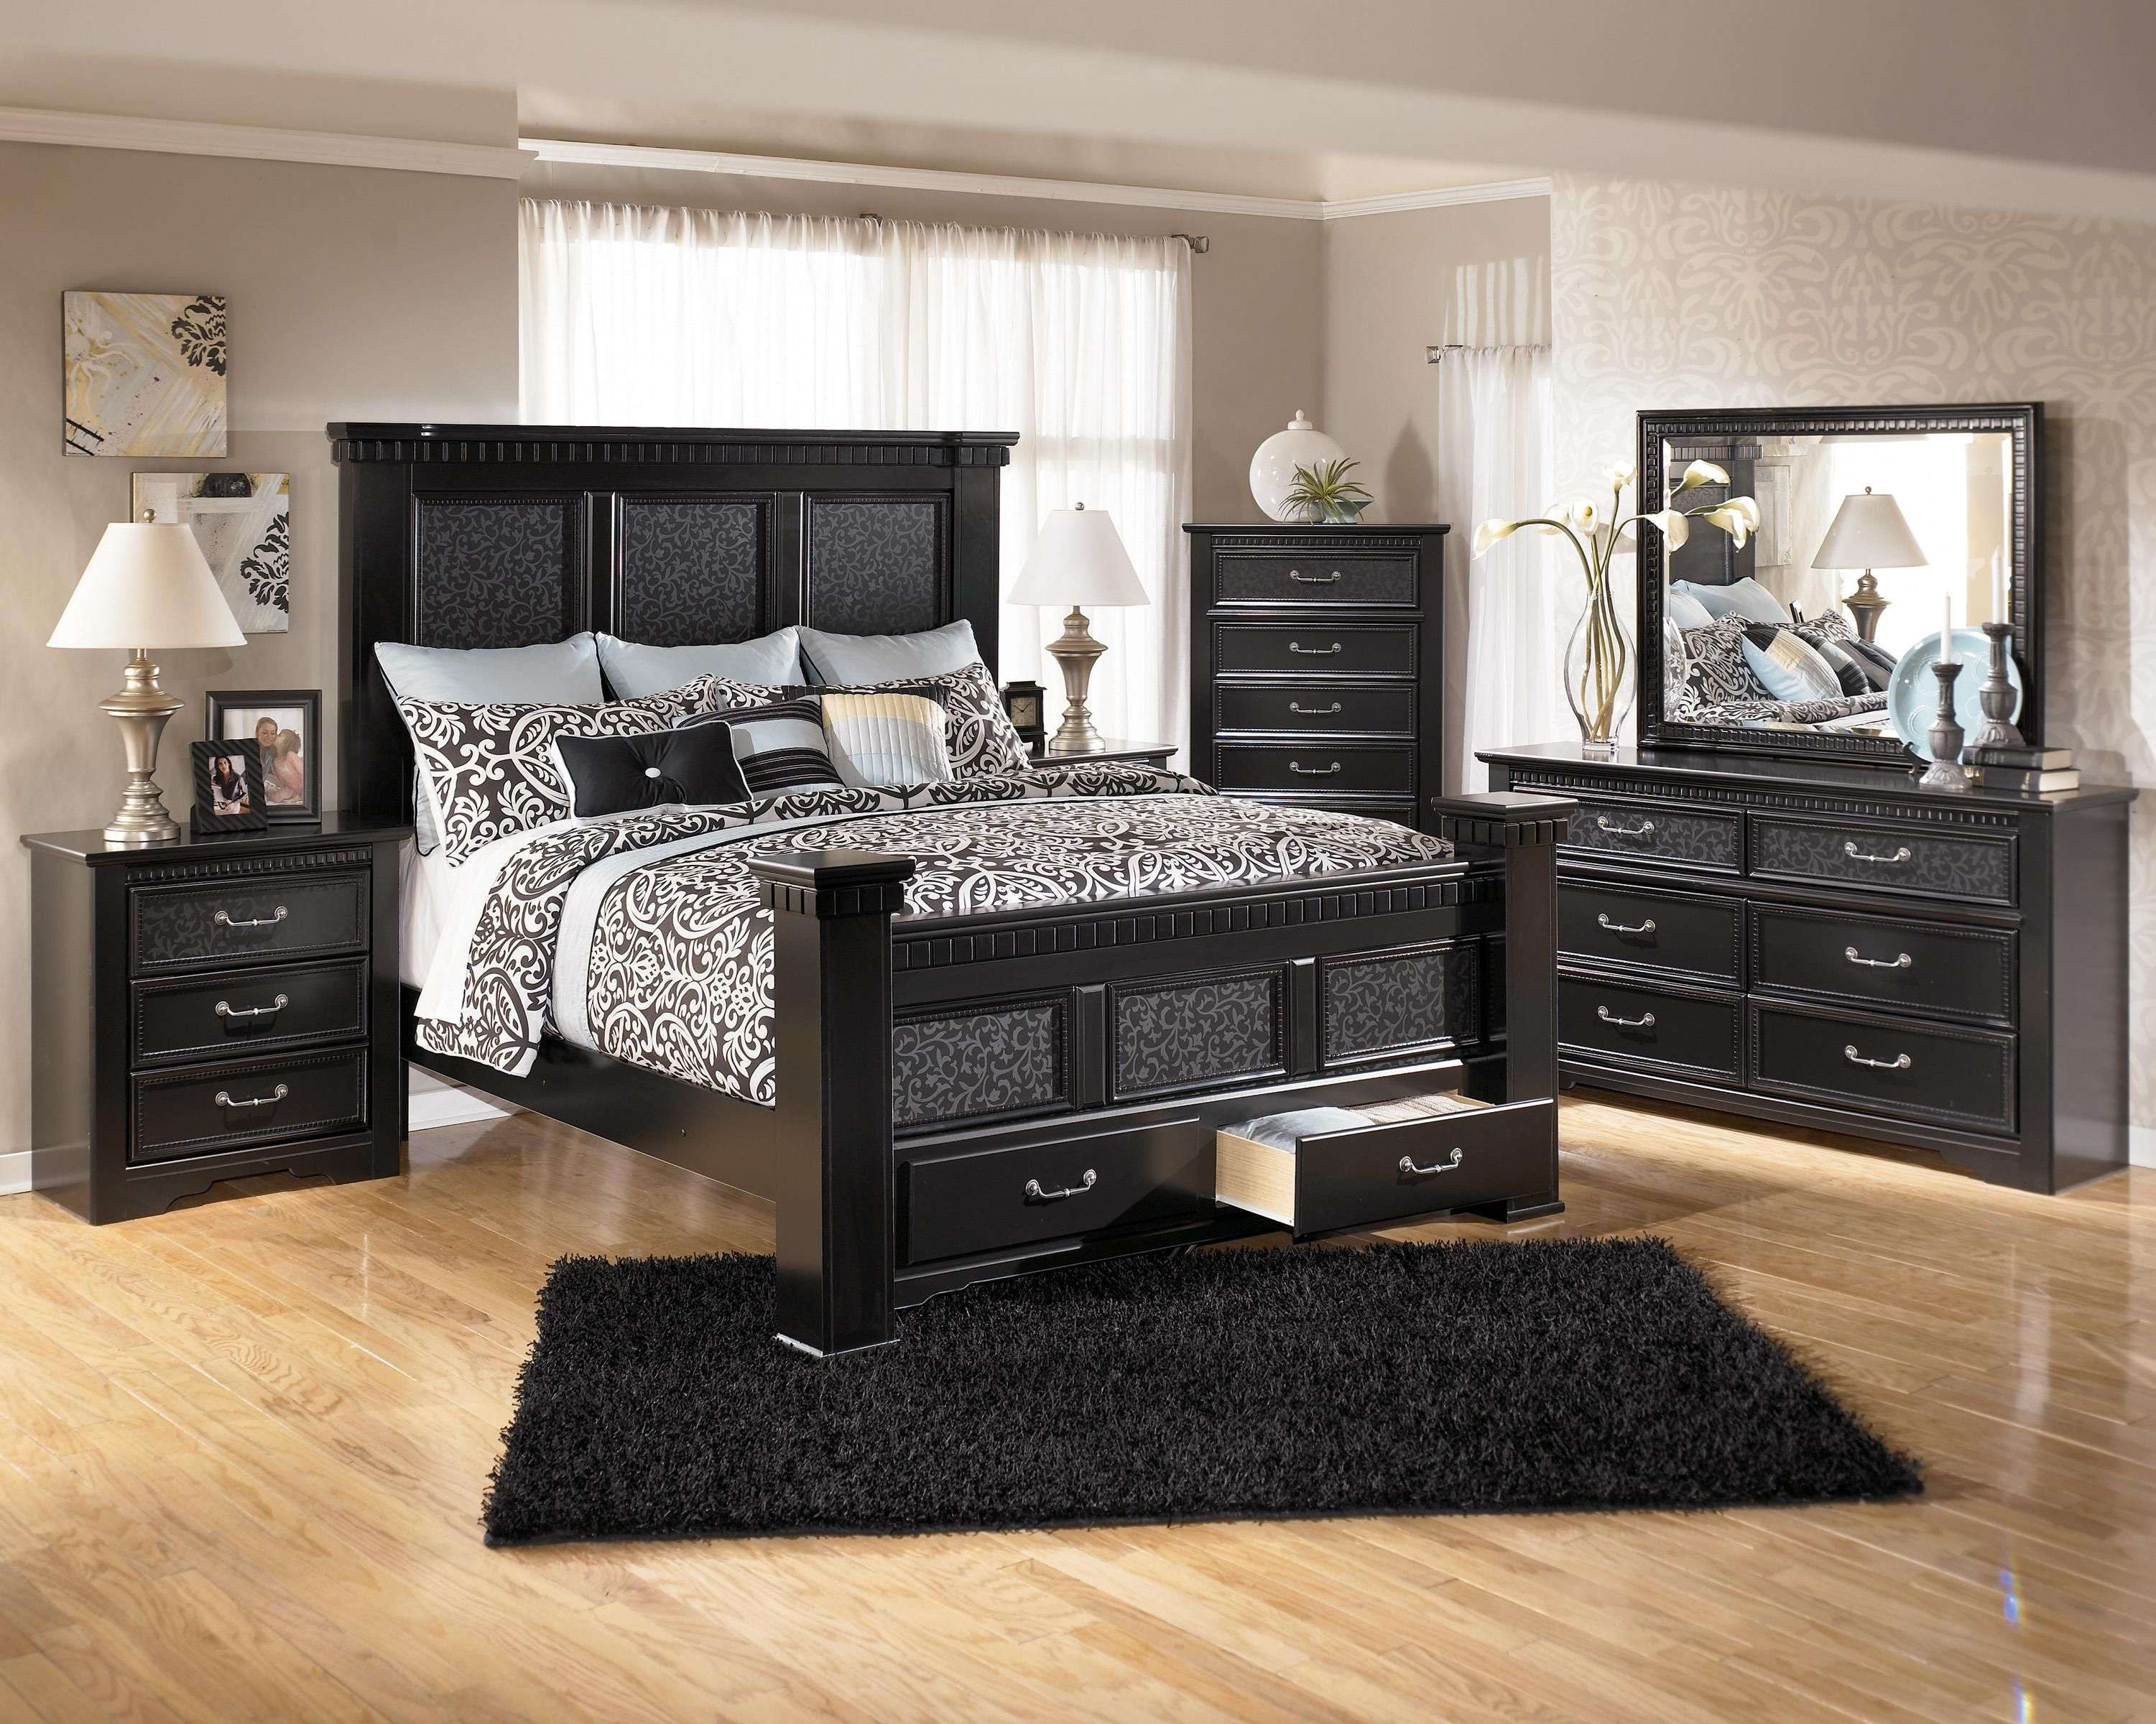 Black King Bedroom Sets Gorgeous Ideas Decor Nice Bedroom Furniture for dimensions 3001 X 2400